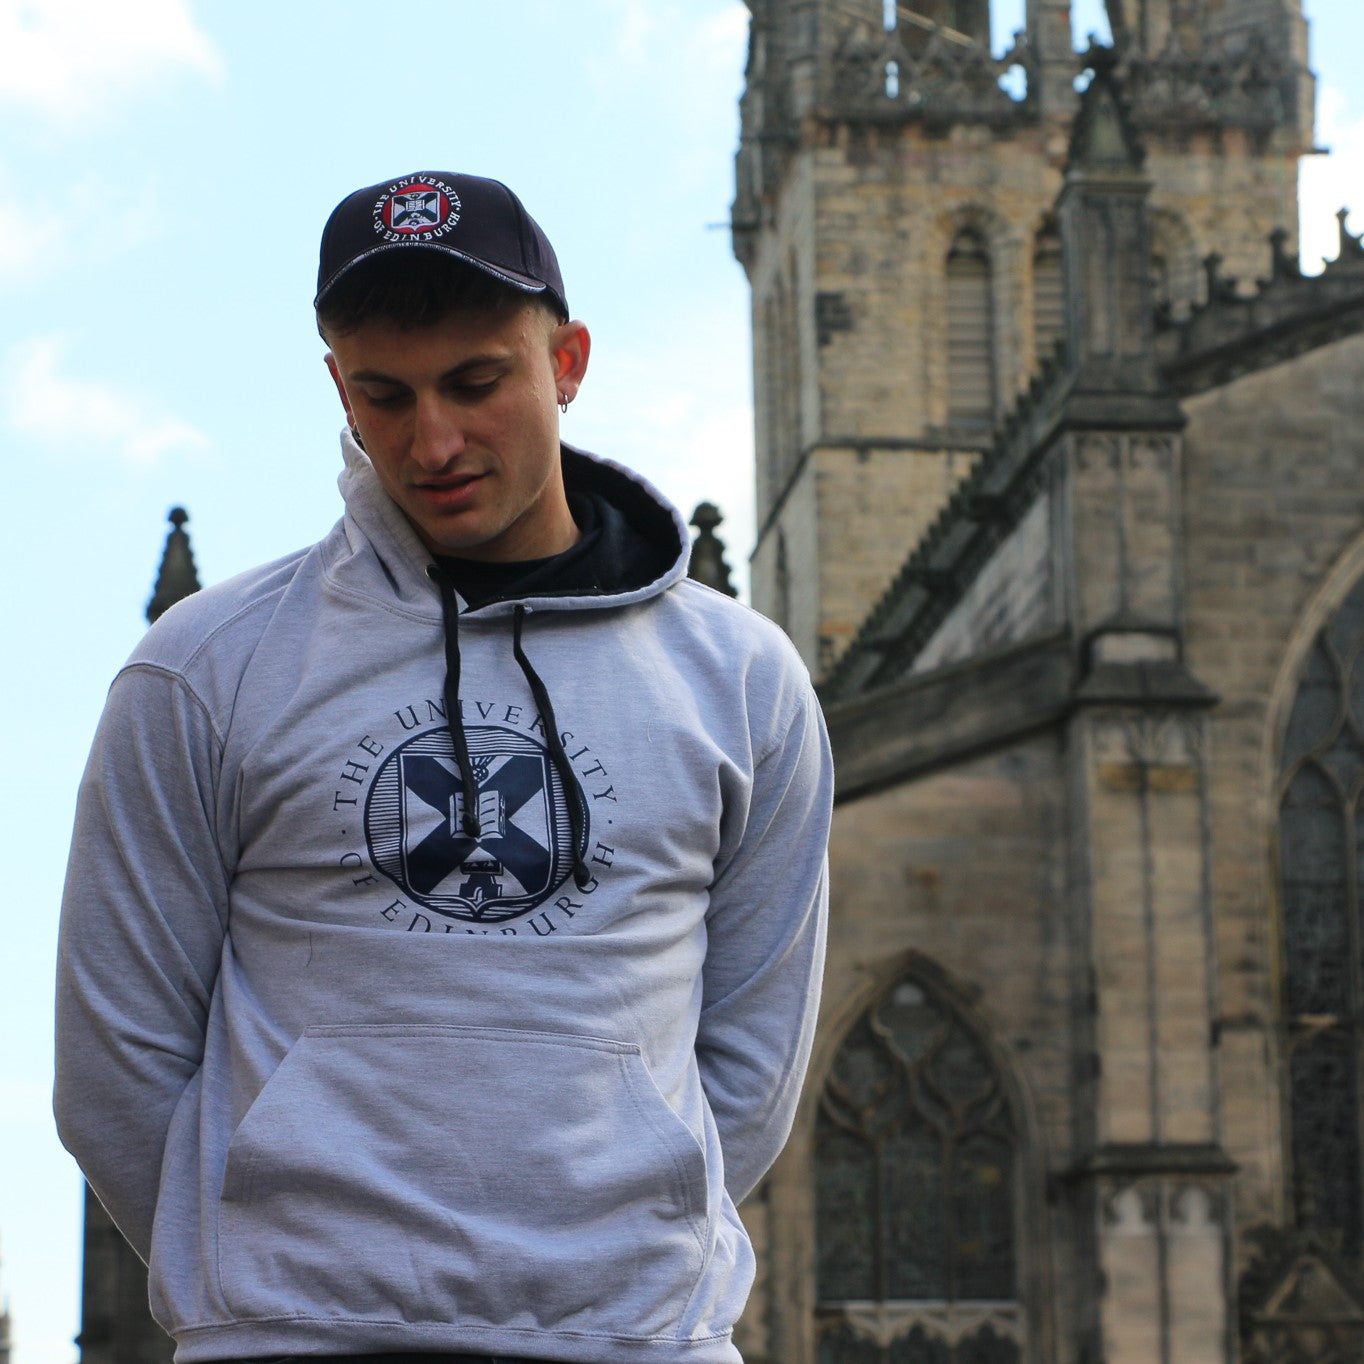 Our model wears Classic Crest Baseball Cap in Navy and Large Crest Two Tone Hoodie in Grey